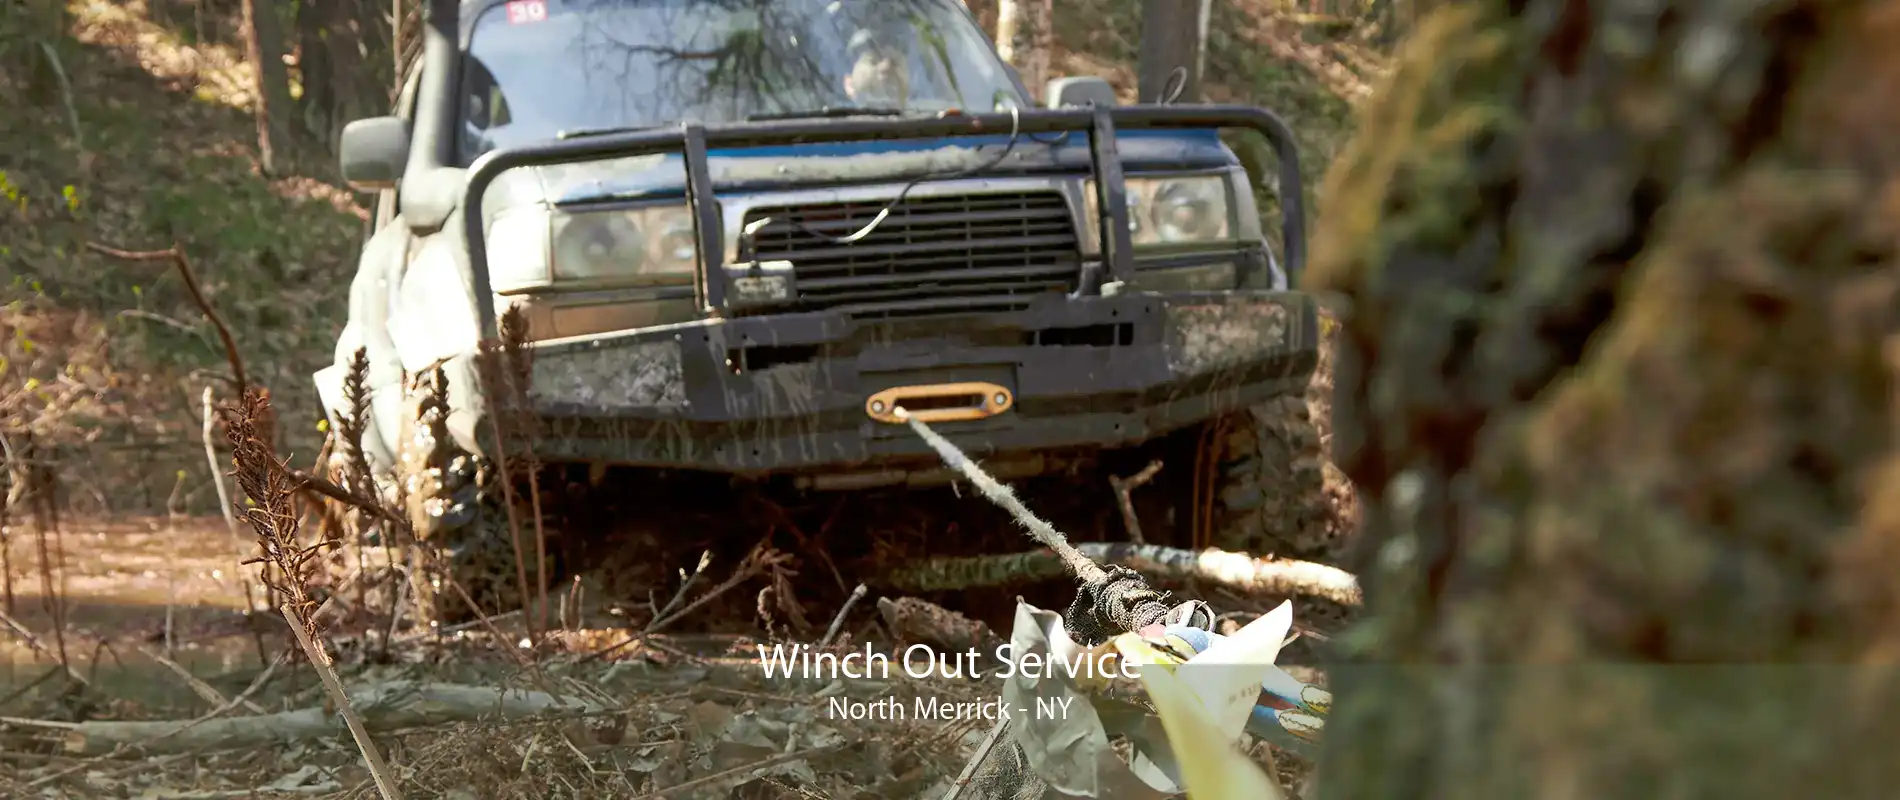 Winch Out Service North Merrick - NY